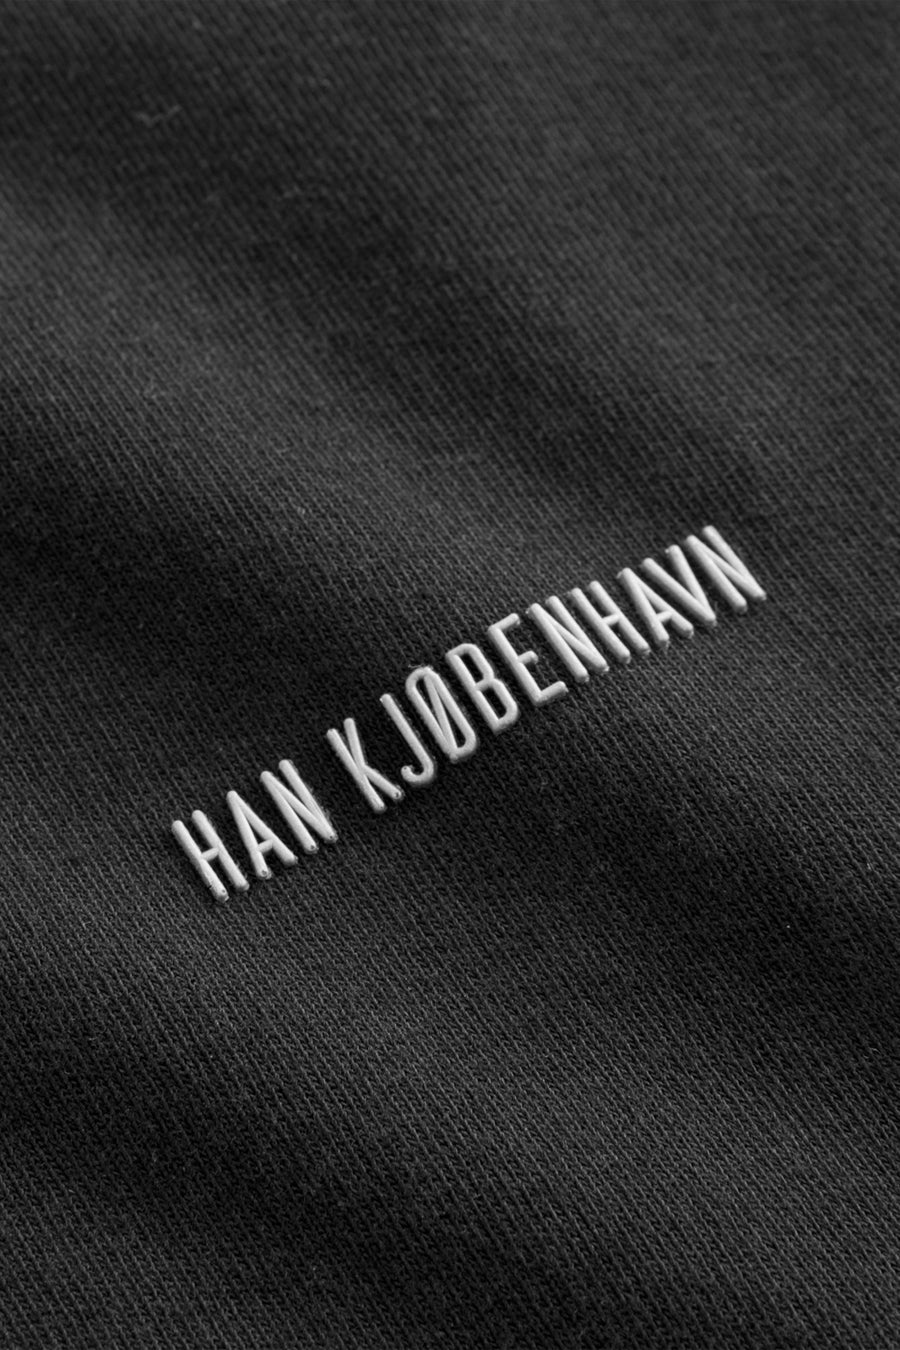 Buy the Han Kjobenhavn Distressed Logo T-Shirt in Black at Intro. Spend £50 for free UK delivery. Official stockists. We ship worldwide.